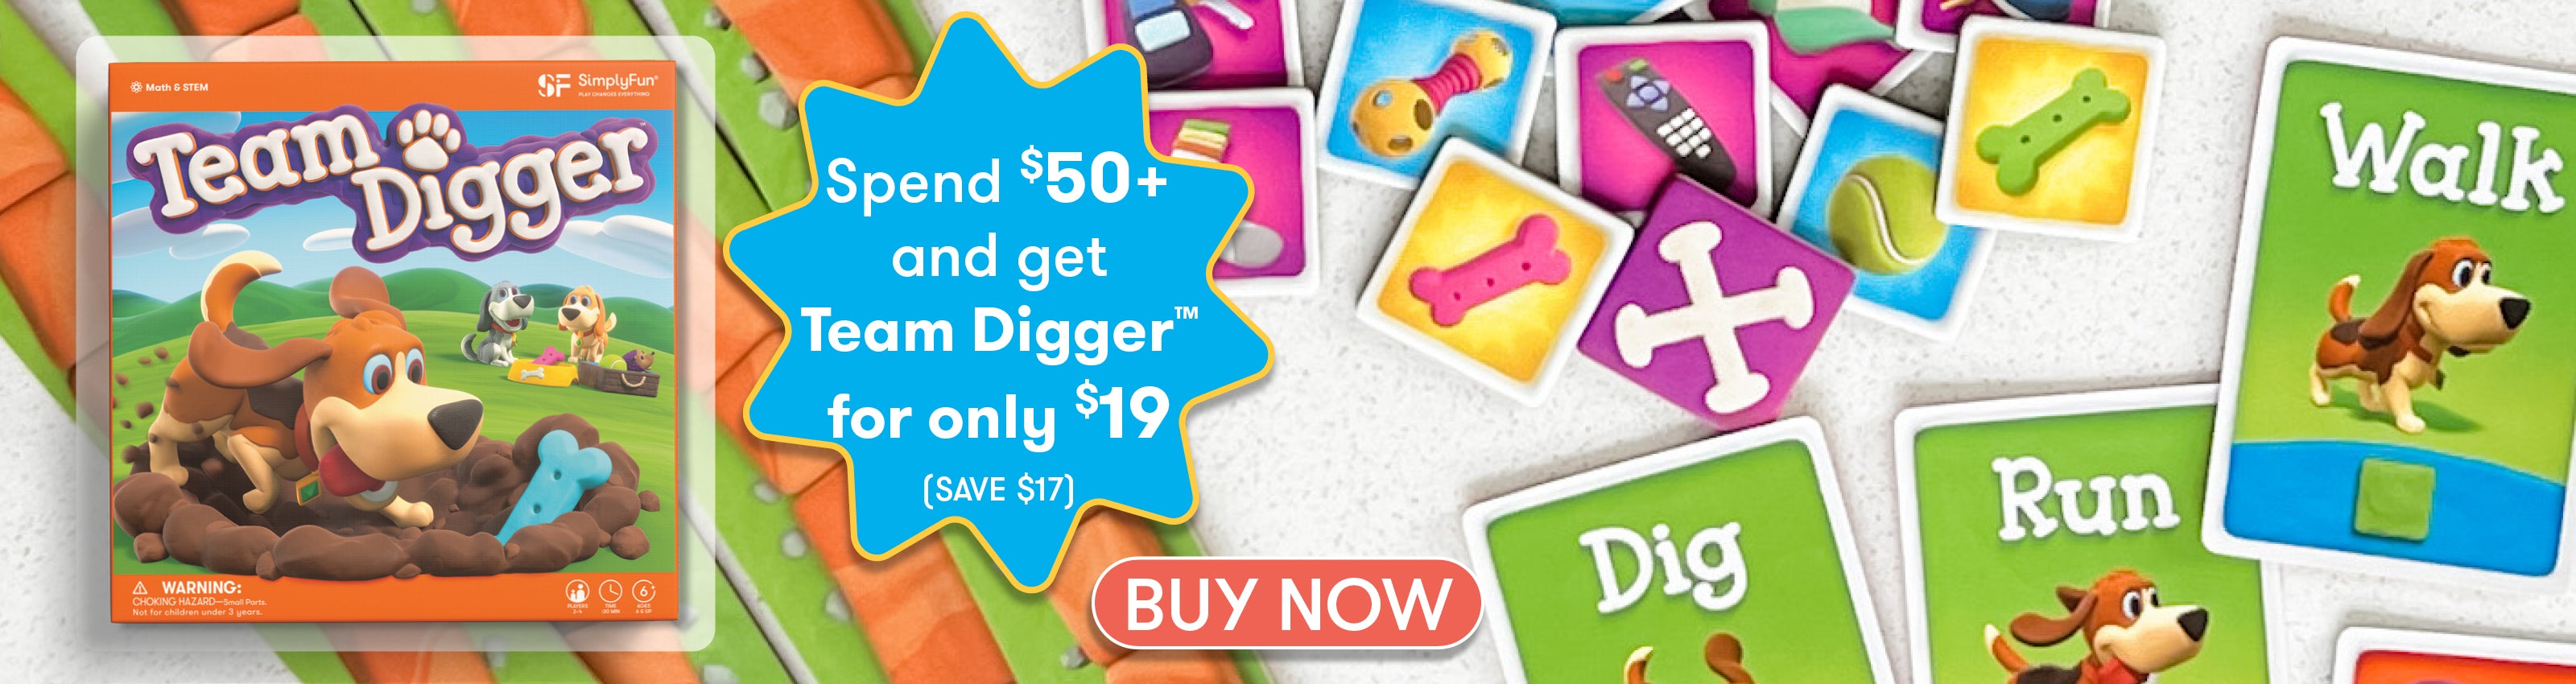 Spend $50+ and get Team Digger for only $19